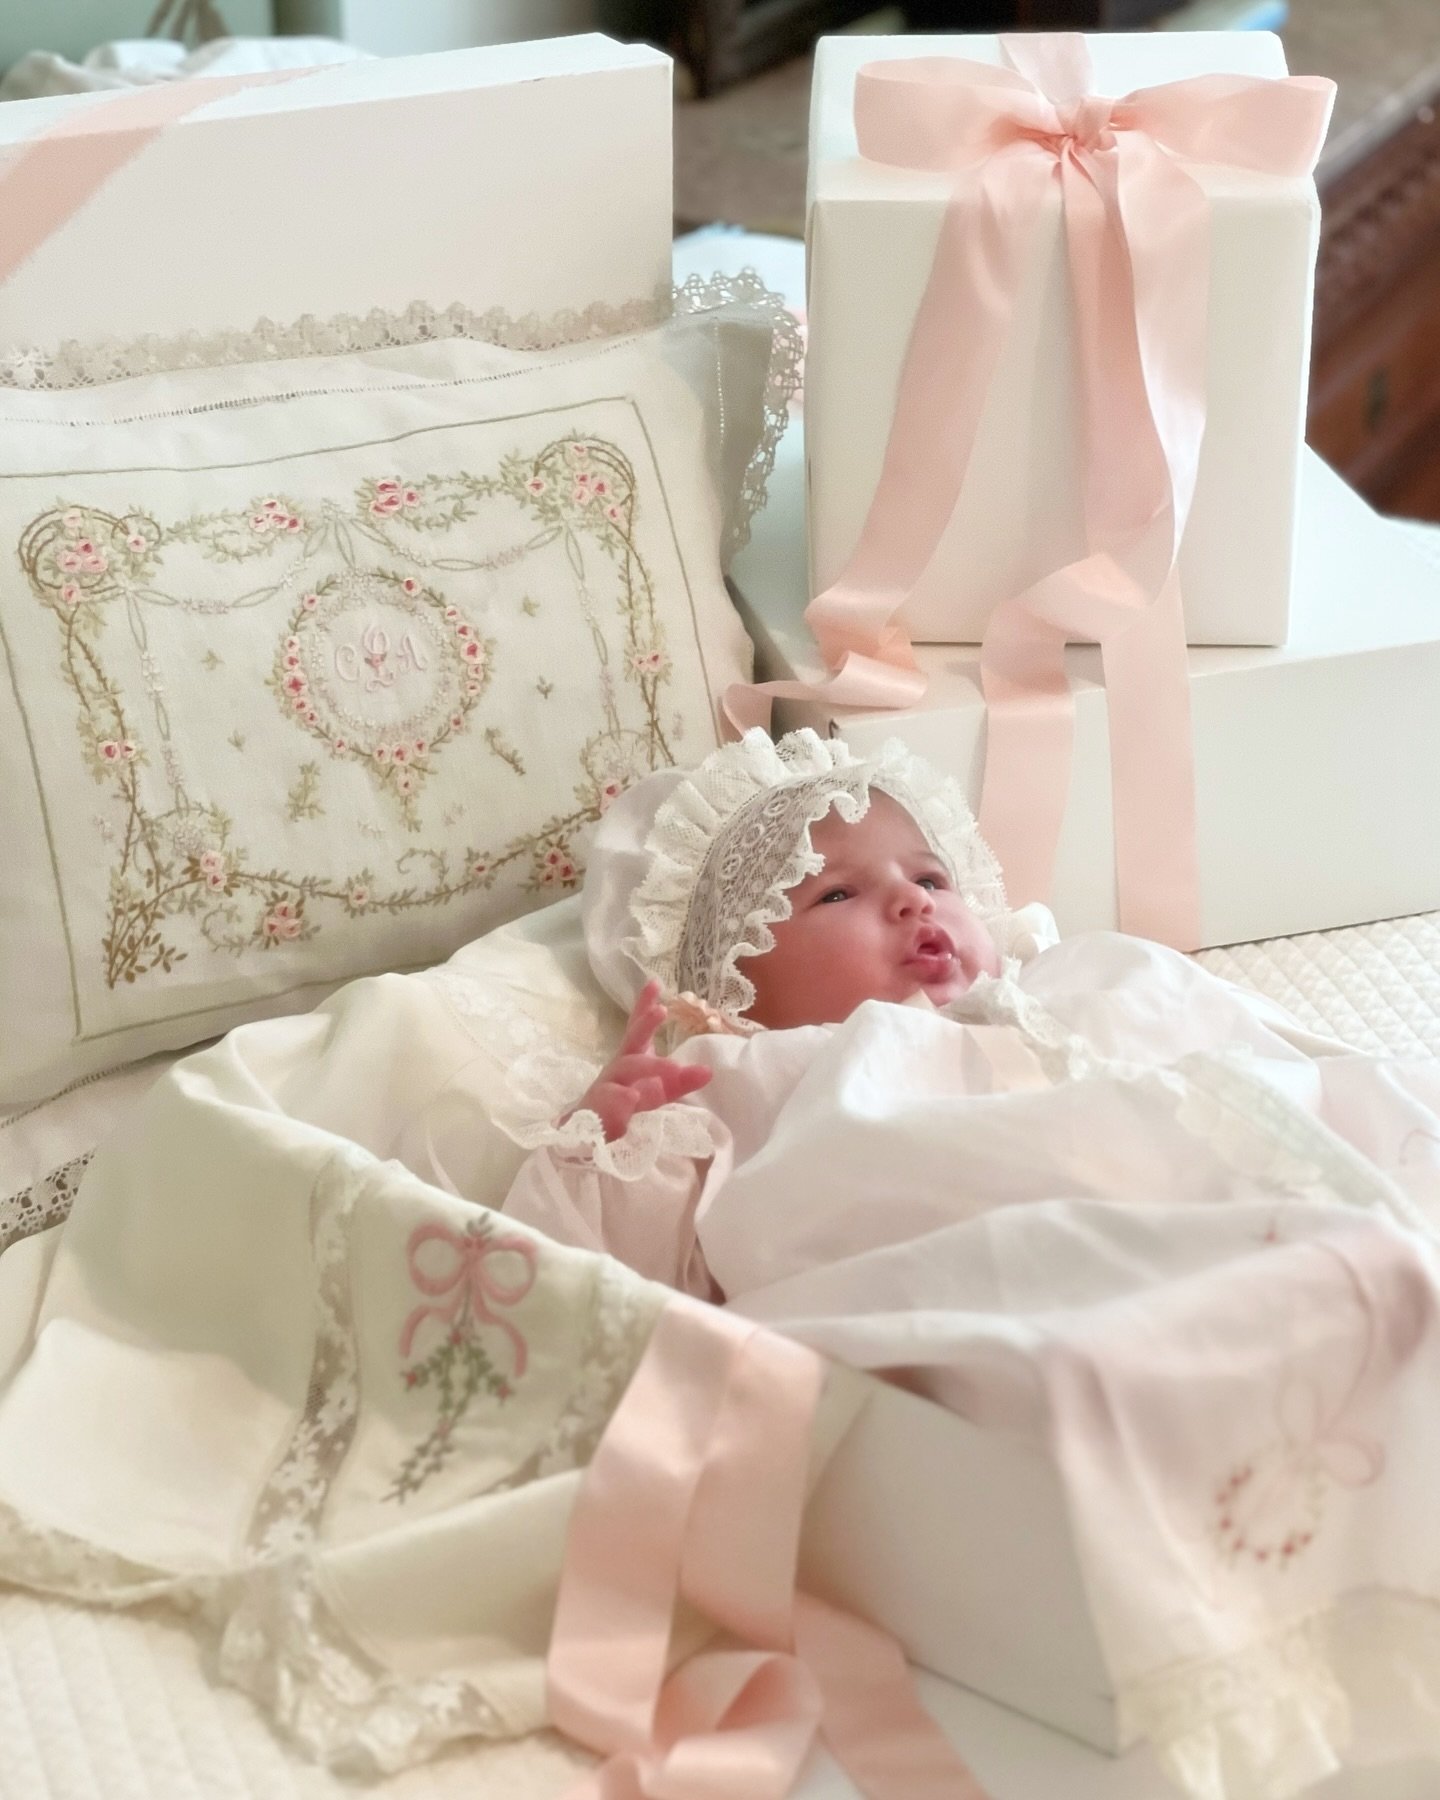 A GIFT FROM HEAVEN 
🎀Cecilia Anne Long🎀

Hi friends!! Long time no see 🥹 you might have been wondering why I&rsquo;ve been MIA for 7 weeks without a heads up! Well, this little cutie surprised us ahead of schedule after I sustained some unpredicte